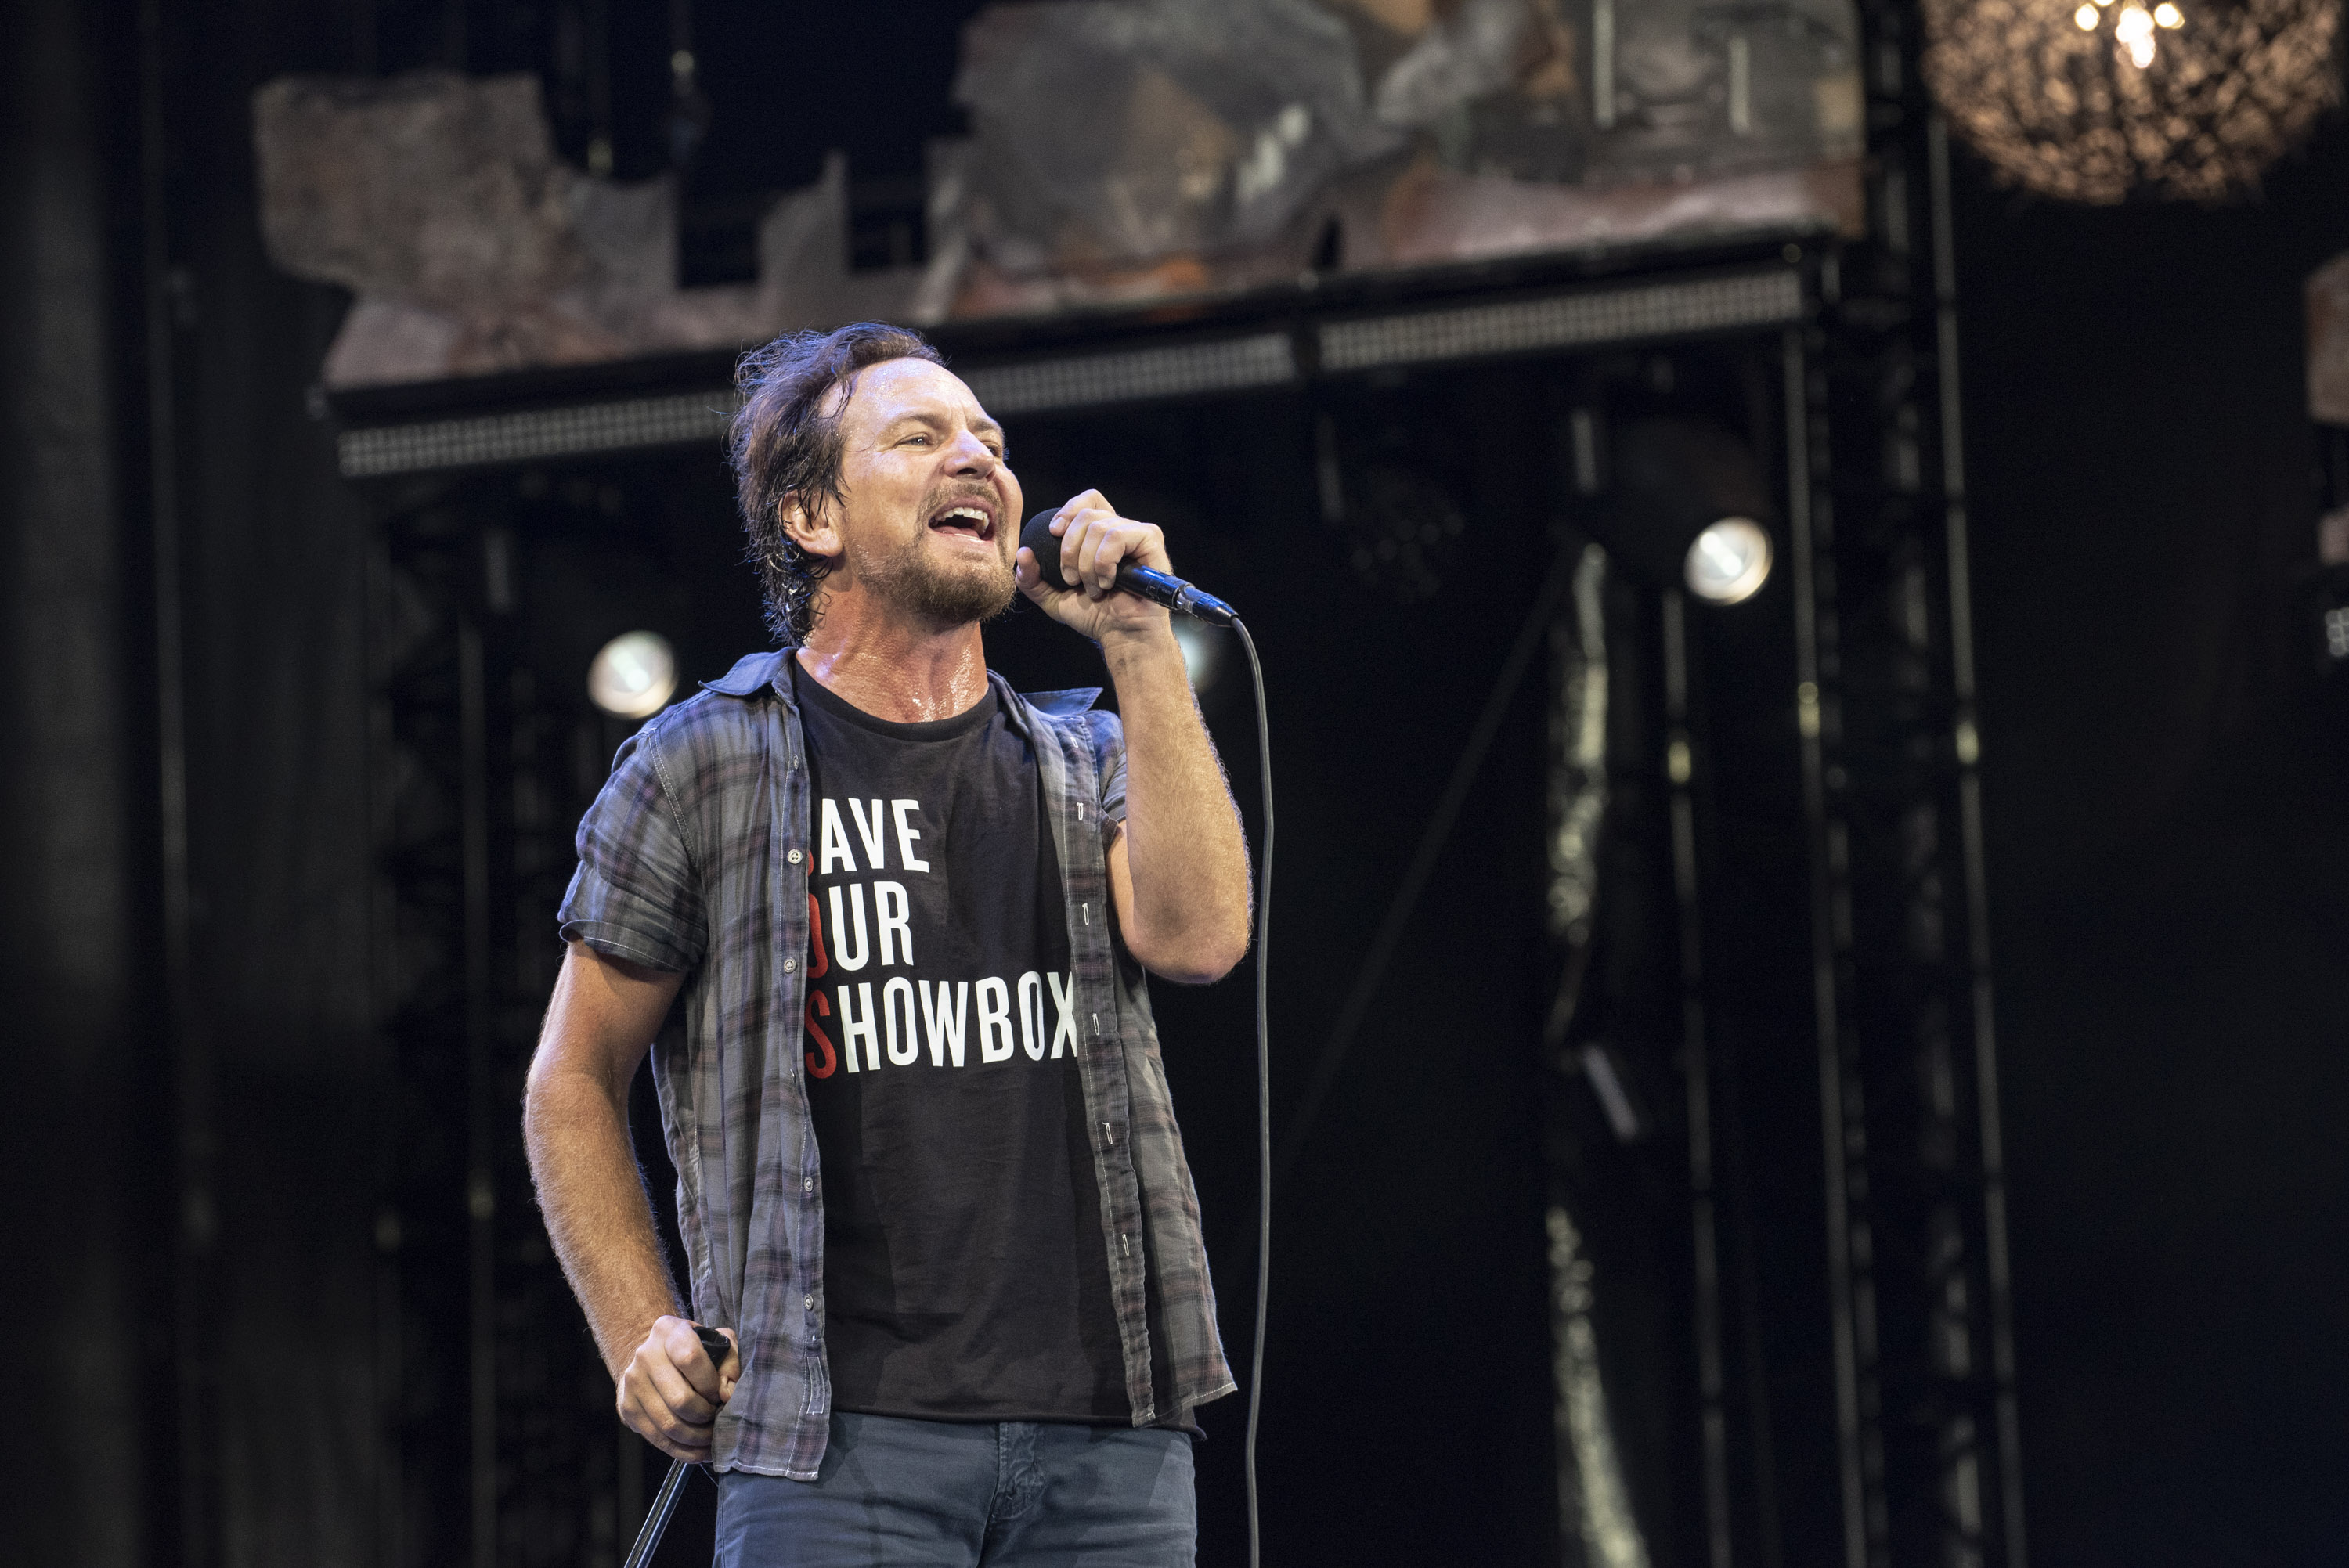 A man (Eddie Vedder) sings into a microphone while wearing a black t-shirt that says “Save Our Showbox” and a short-sleeve plaid shirt over it.